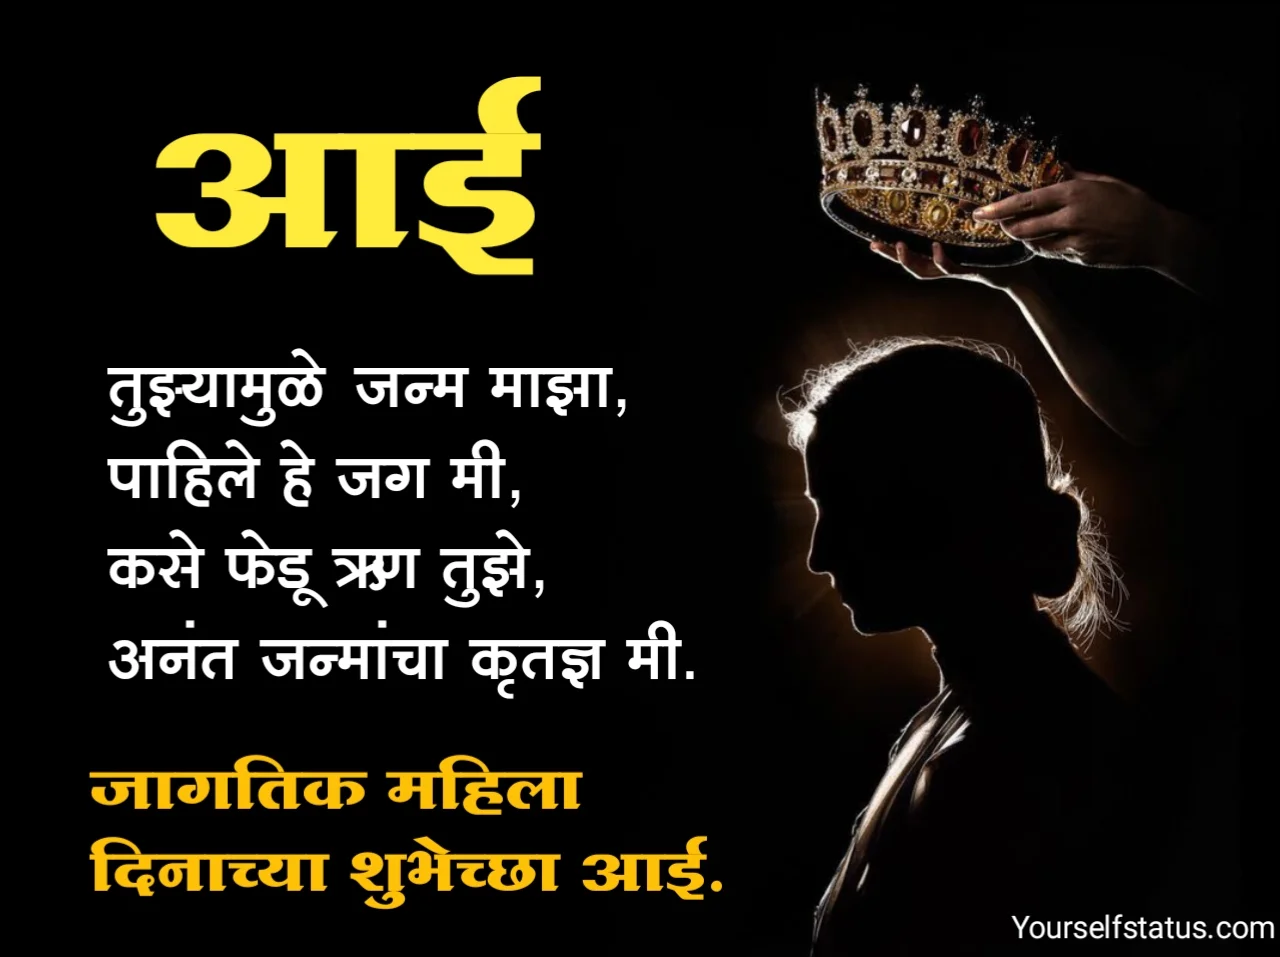 women's day quotes in marathi for mother